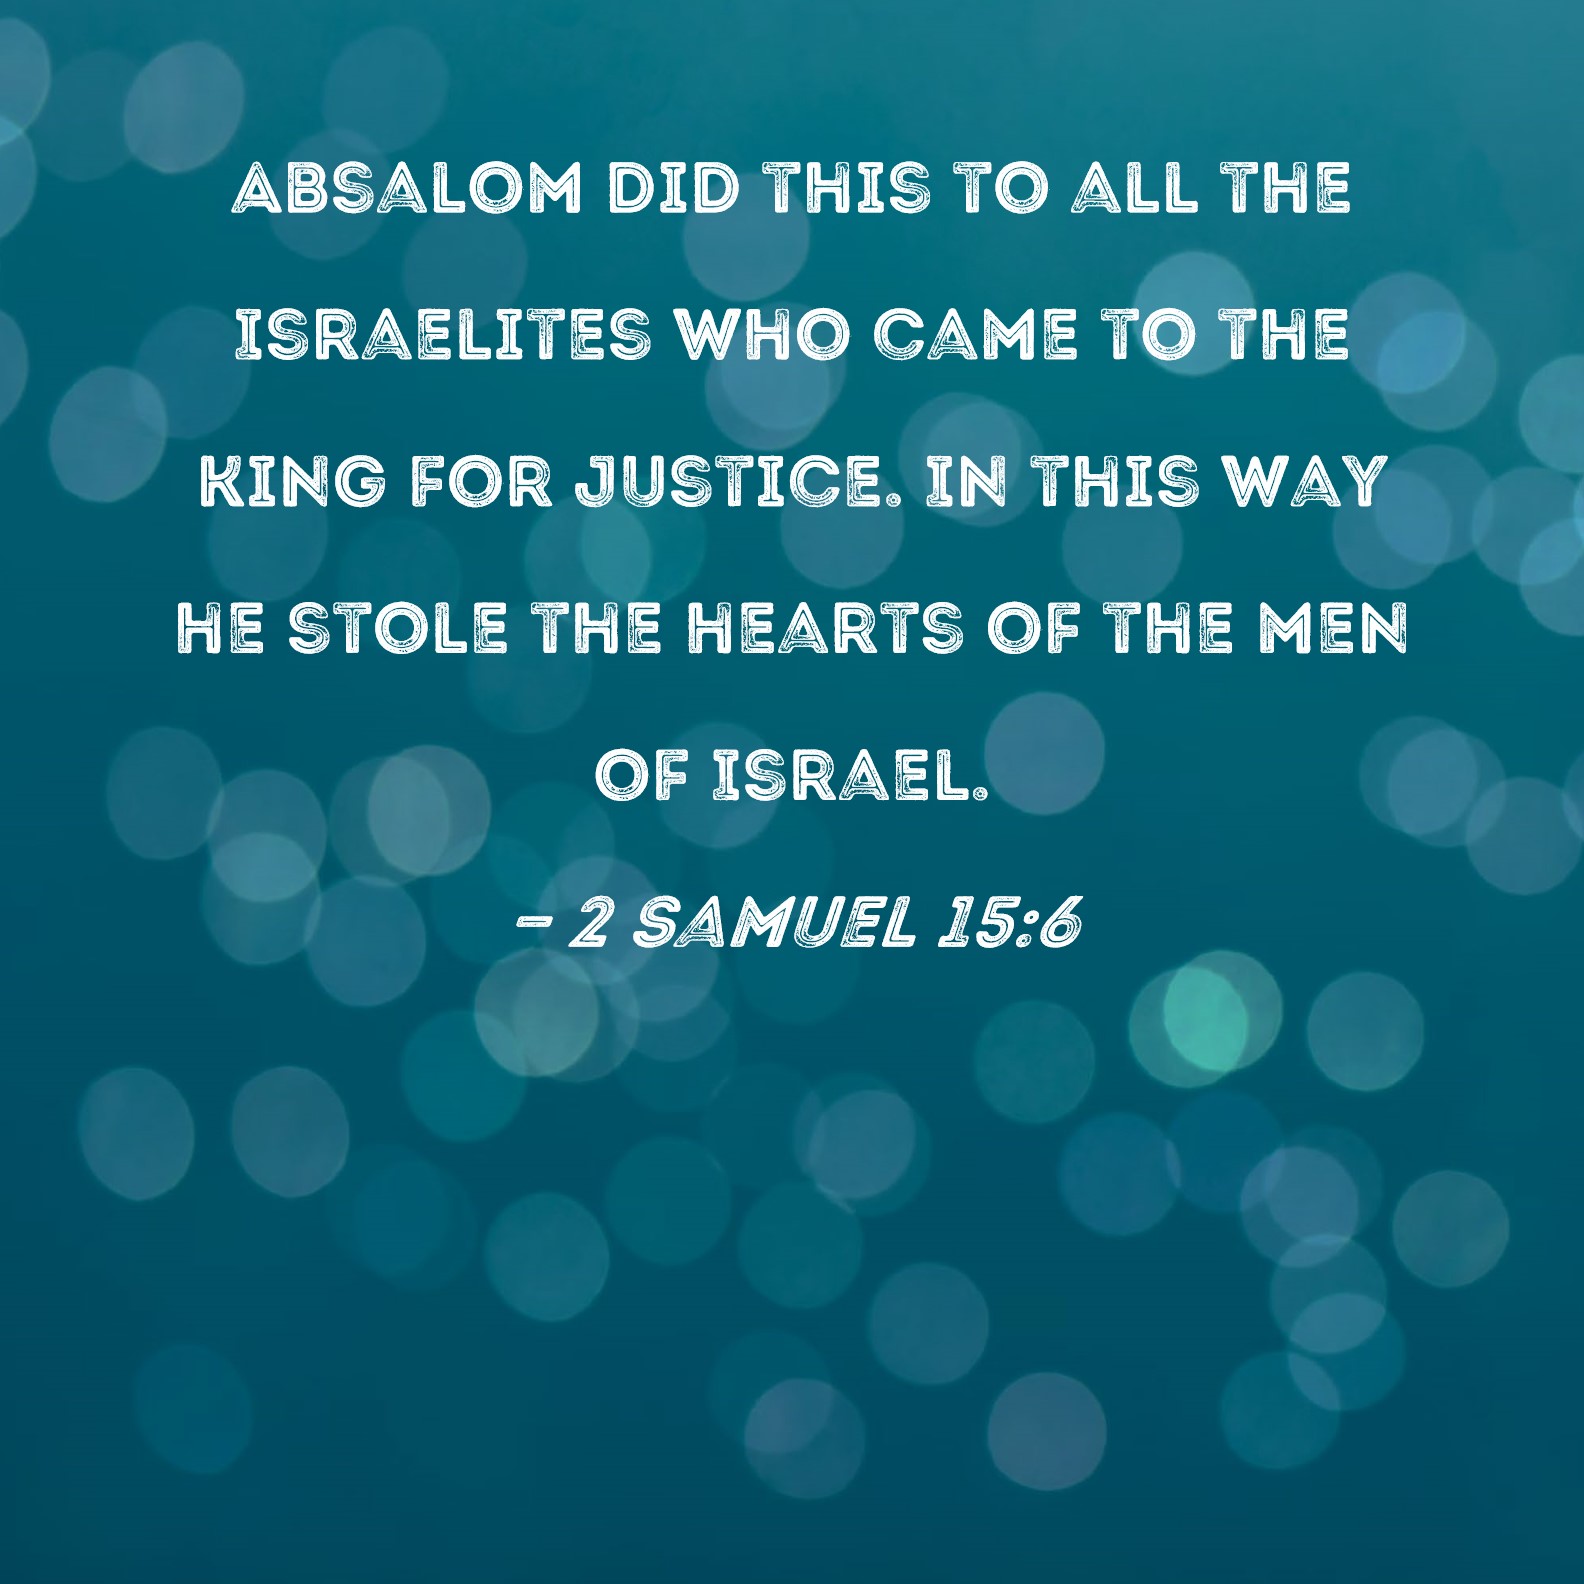 2 Samuel 15:6 Absalom did this to all the Israelites who came to the king  for justice. In this way he stole the hearts of the men of Israel.